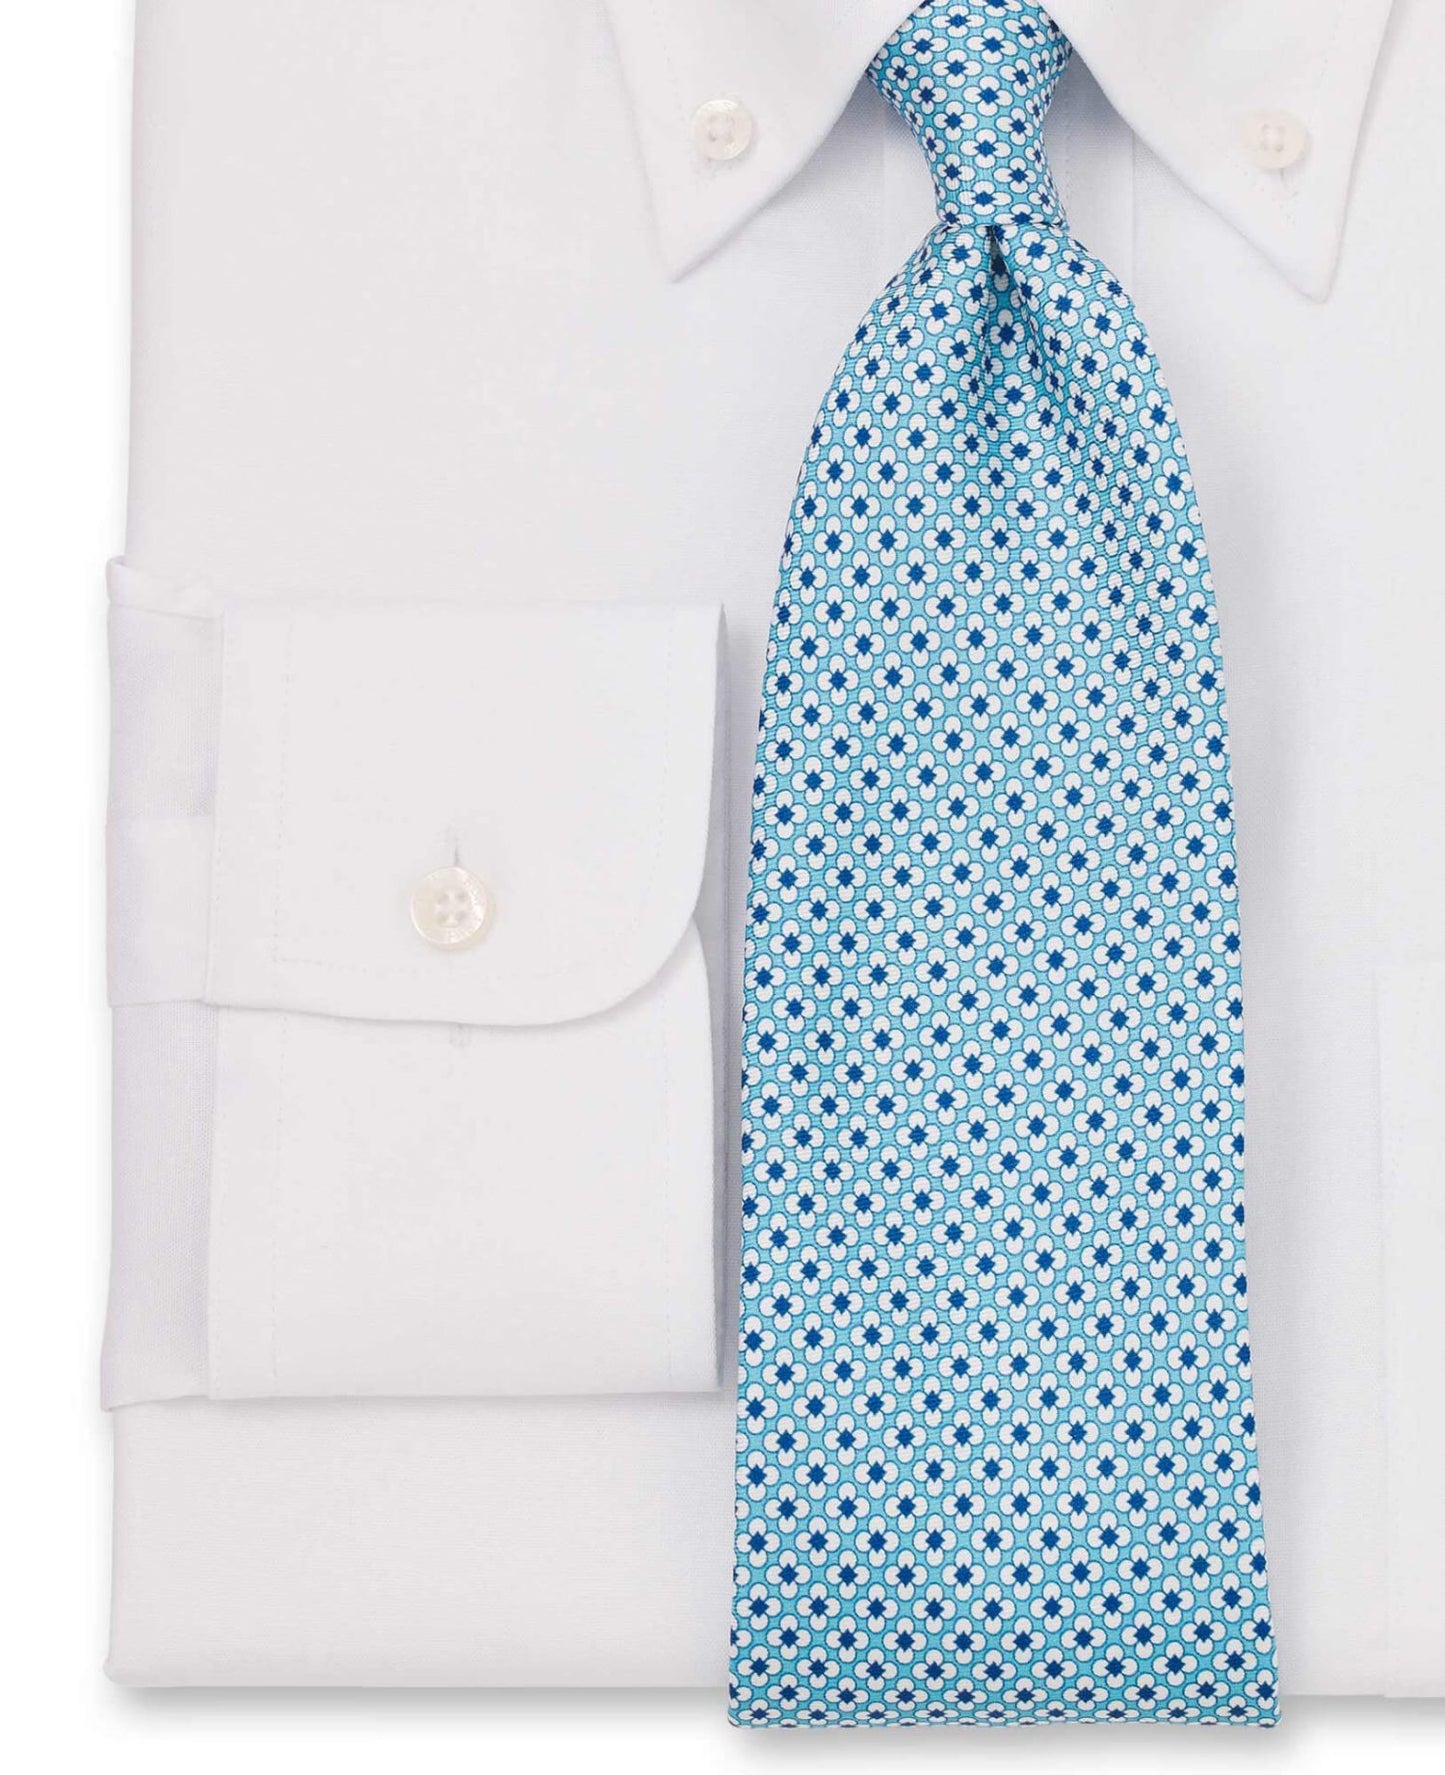 WHITE PINPOINT OXFORD BUTTON DOWN CLASSIC FIT SHIRT